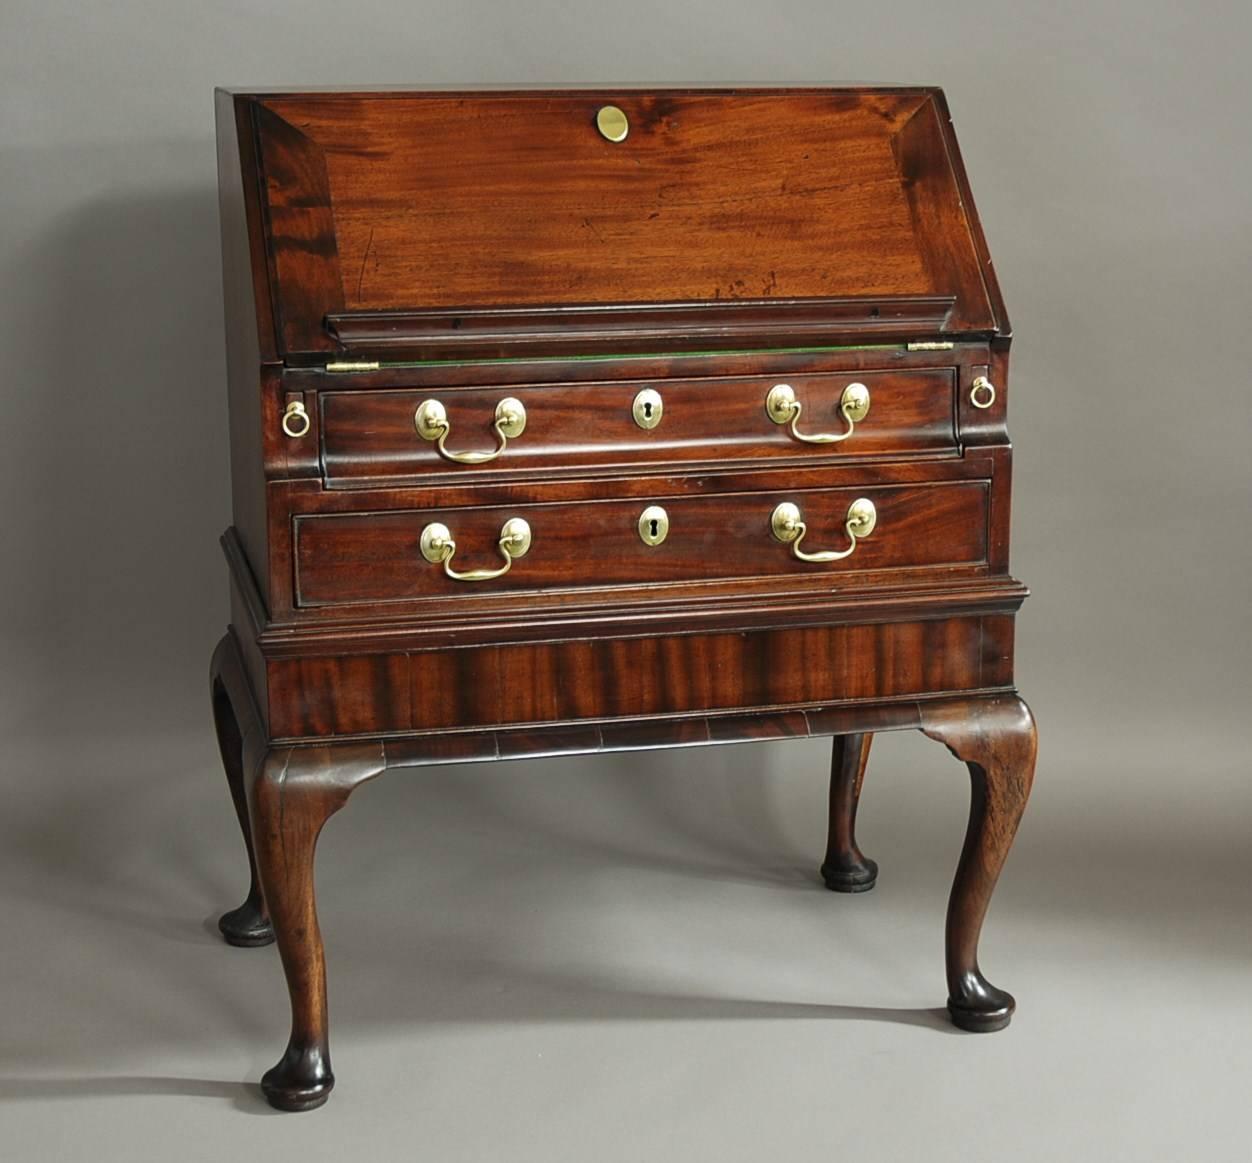 A rare mid-18th century mahogany bureau on Stand of elegant design and of small proportions.

This bureau consists of a solid mahogany top leading down to the solid mahogany fall, the timber choice on this piece is of excellent quality.

The